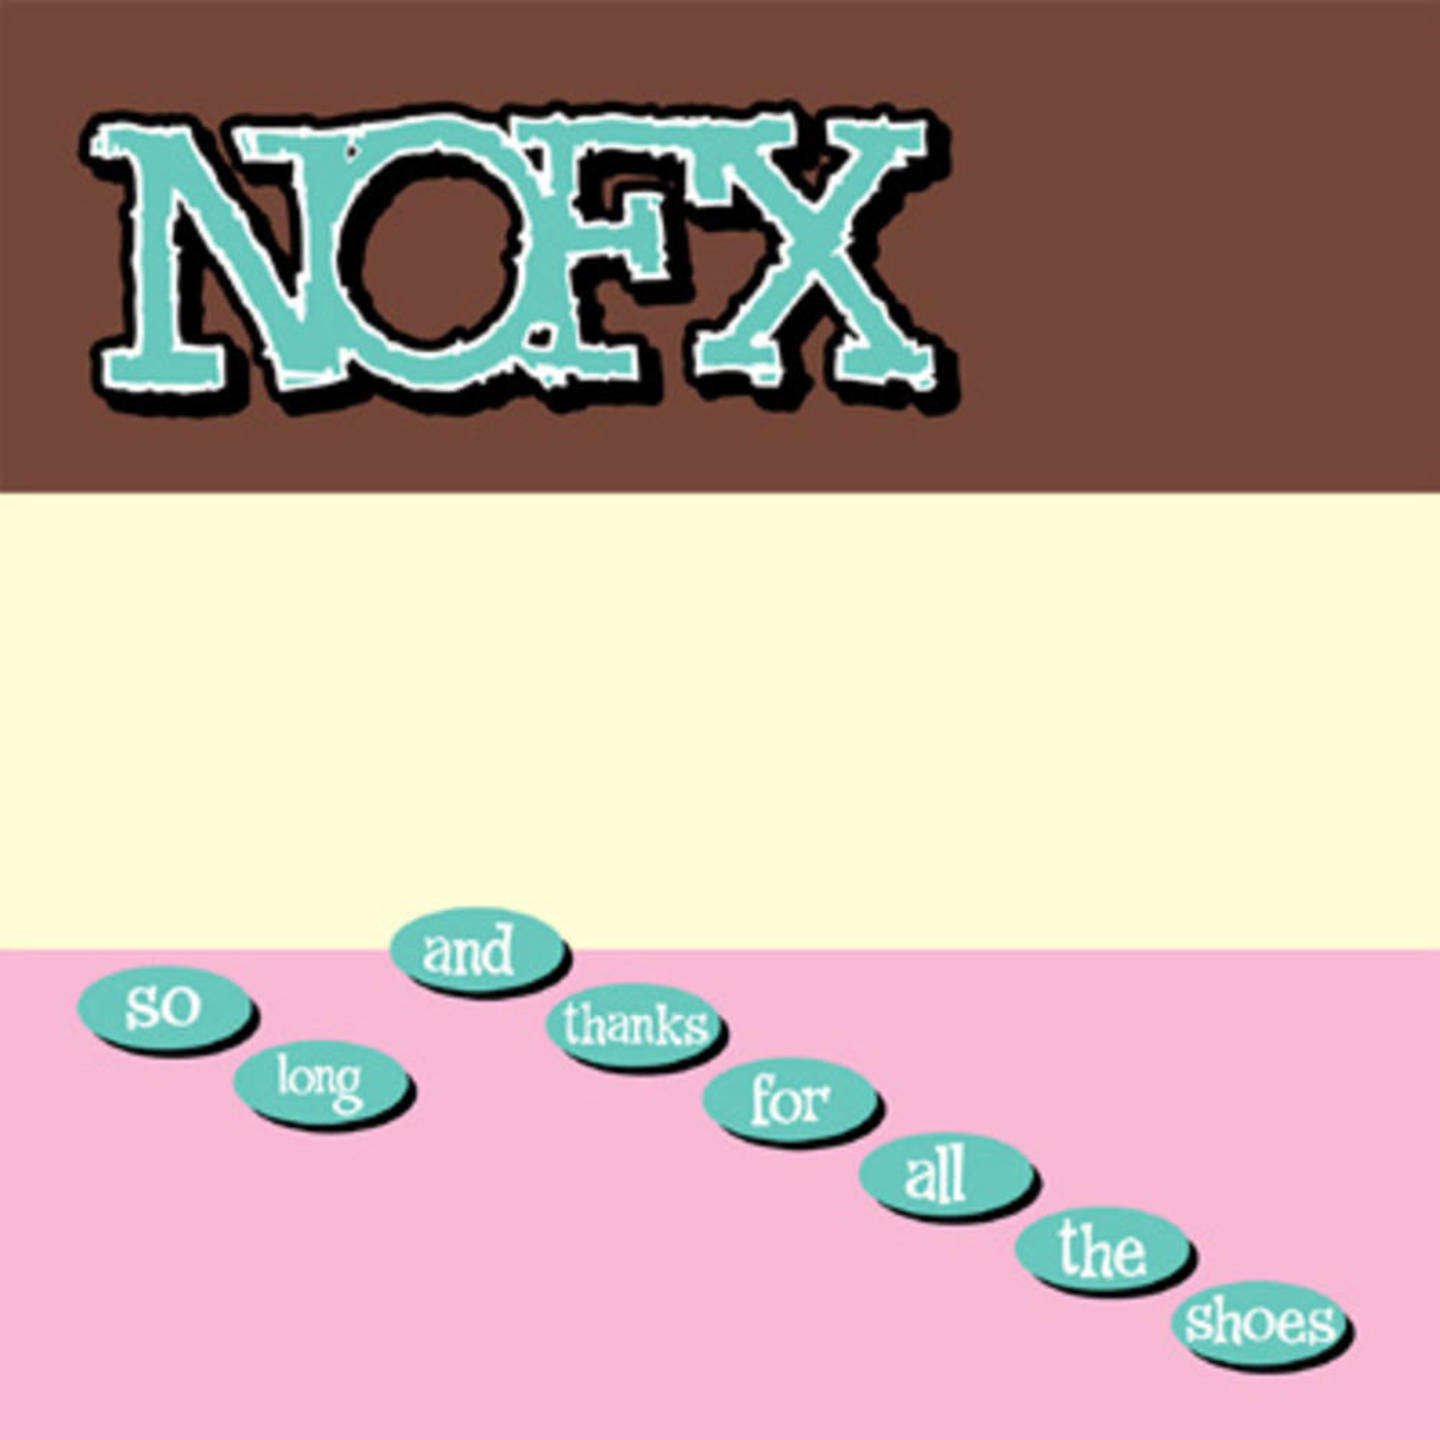 NOFX - So Long And Thanks For All The Shoes LP 25th Anniversary Neapolitan Colour vinyl